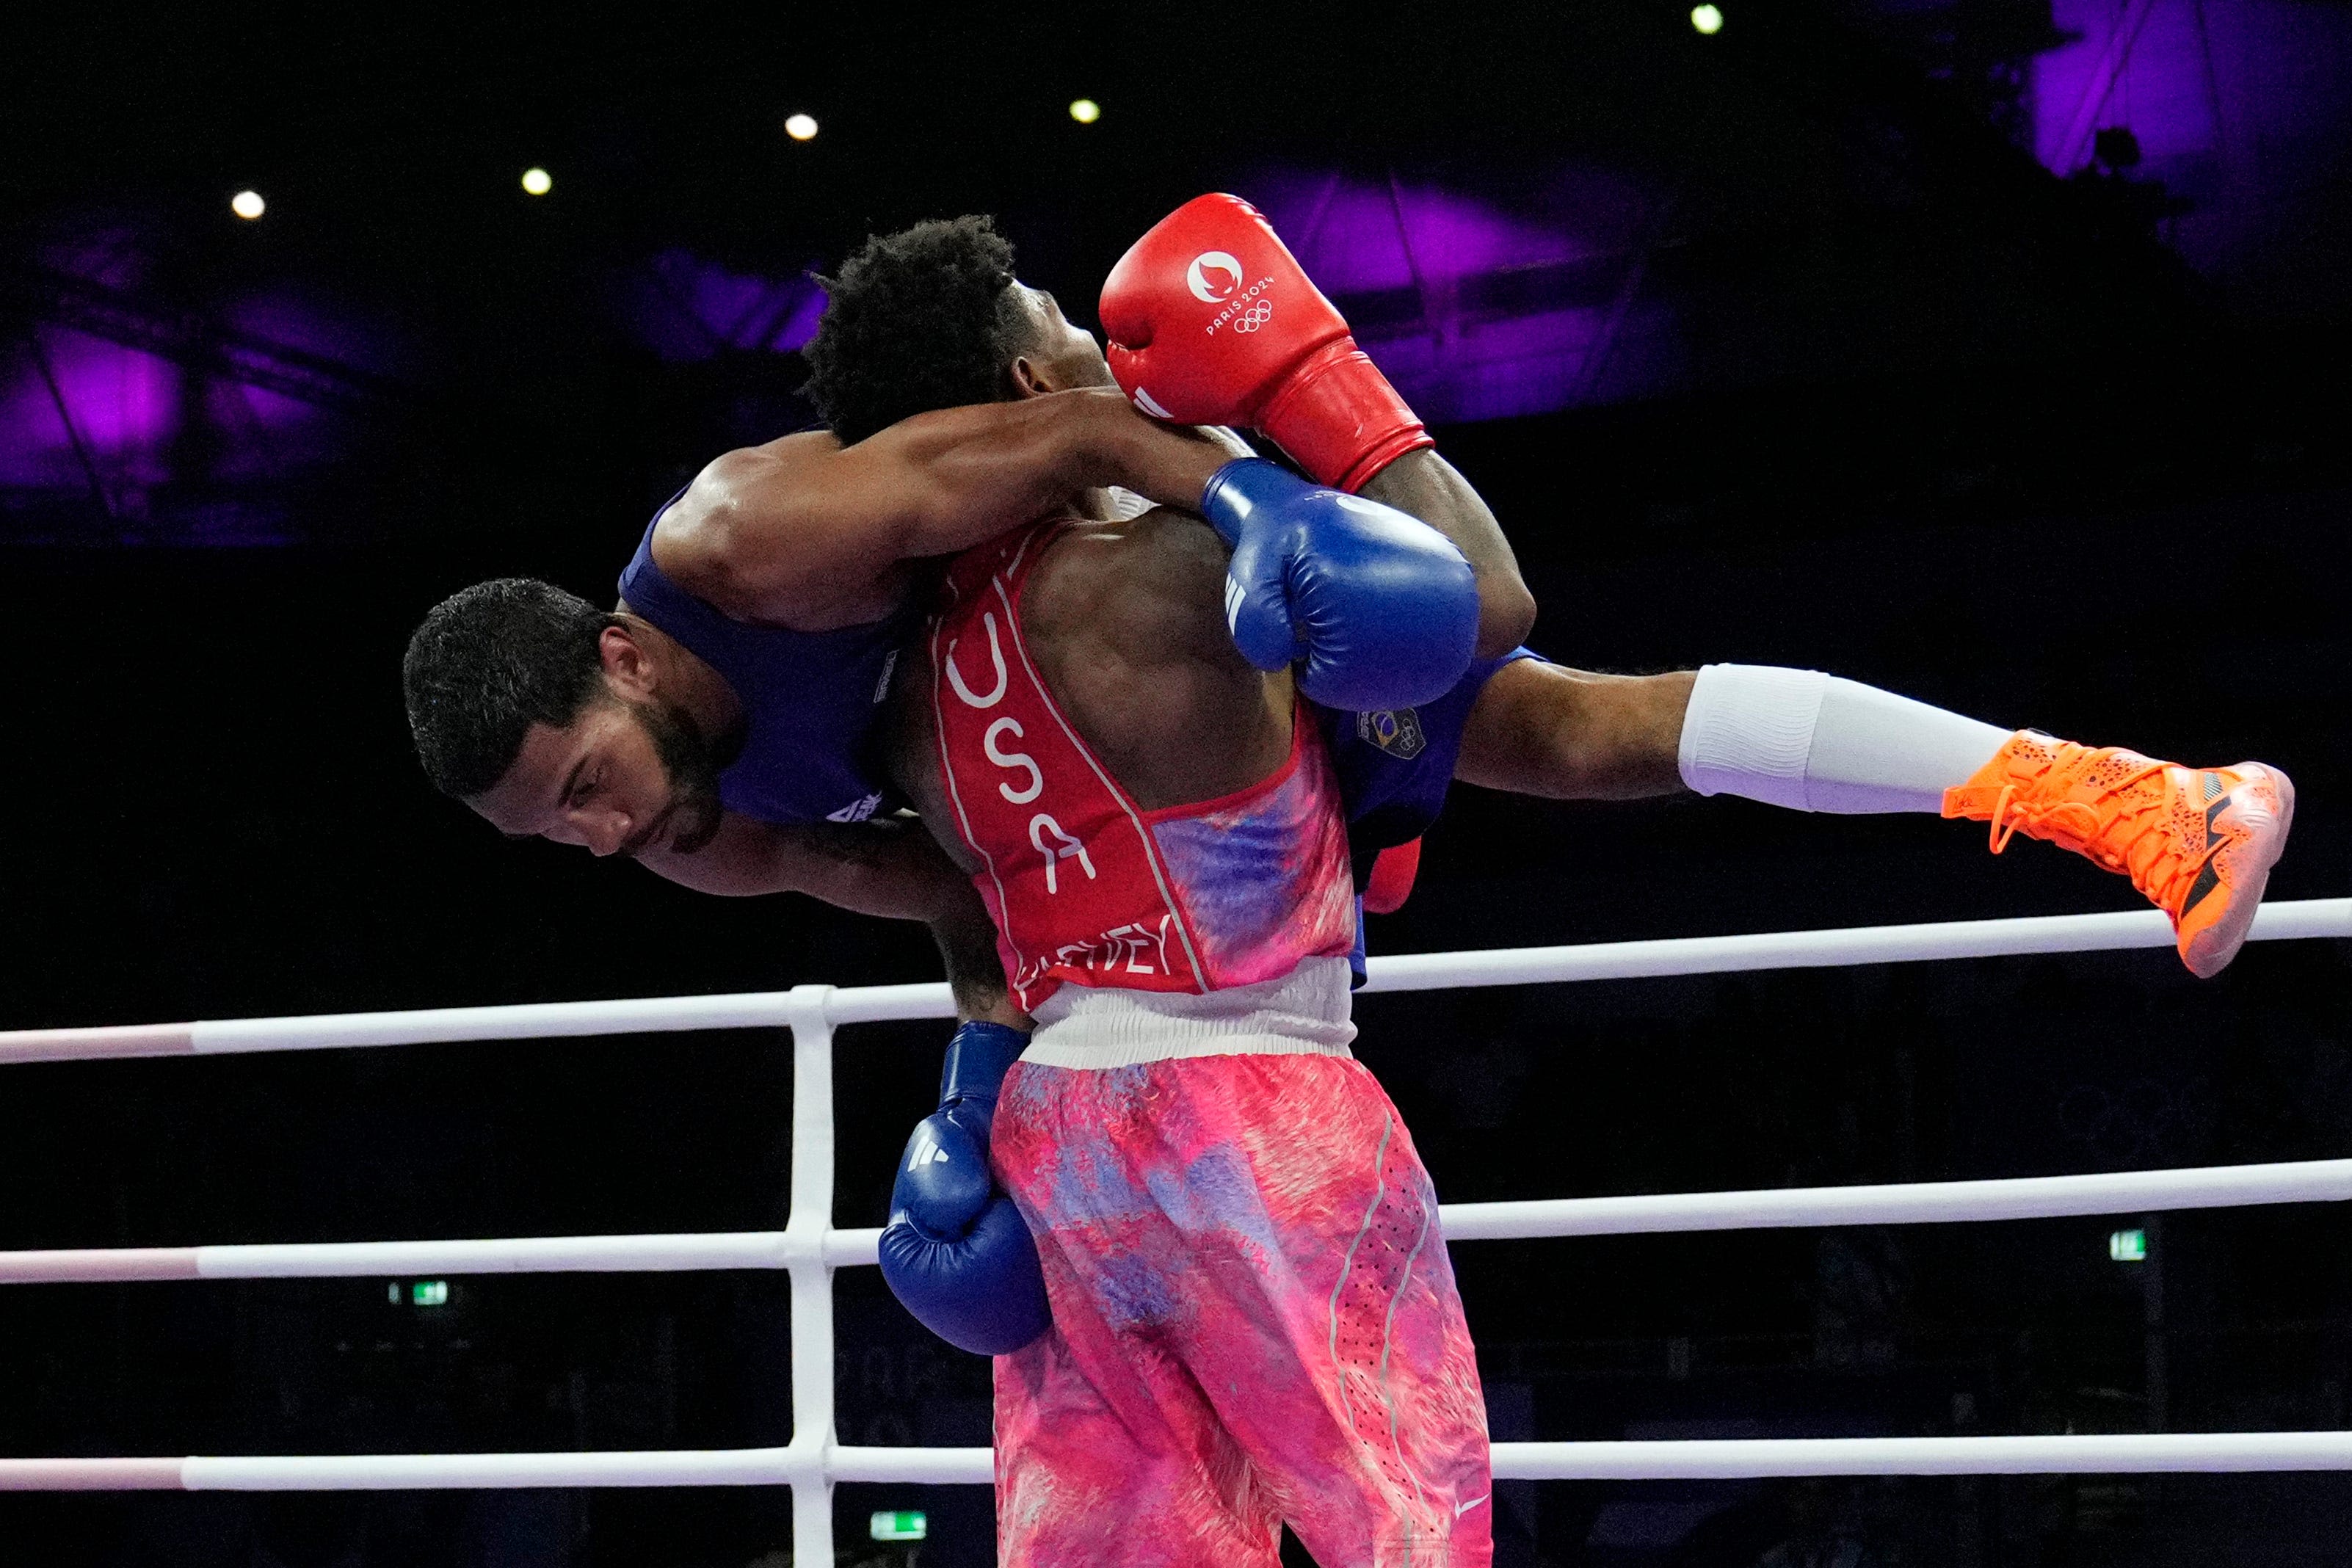 US boxer trailed on Olympic judges' scorecards entering final round. How he advanced